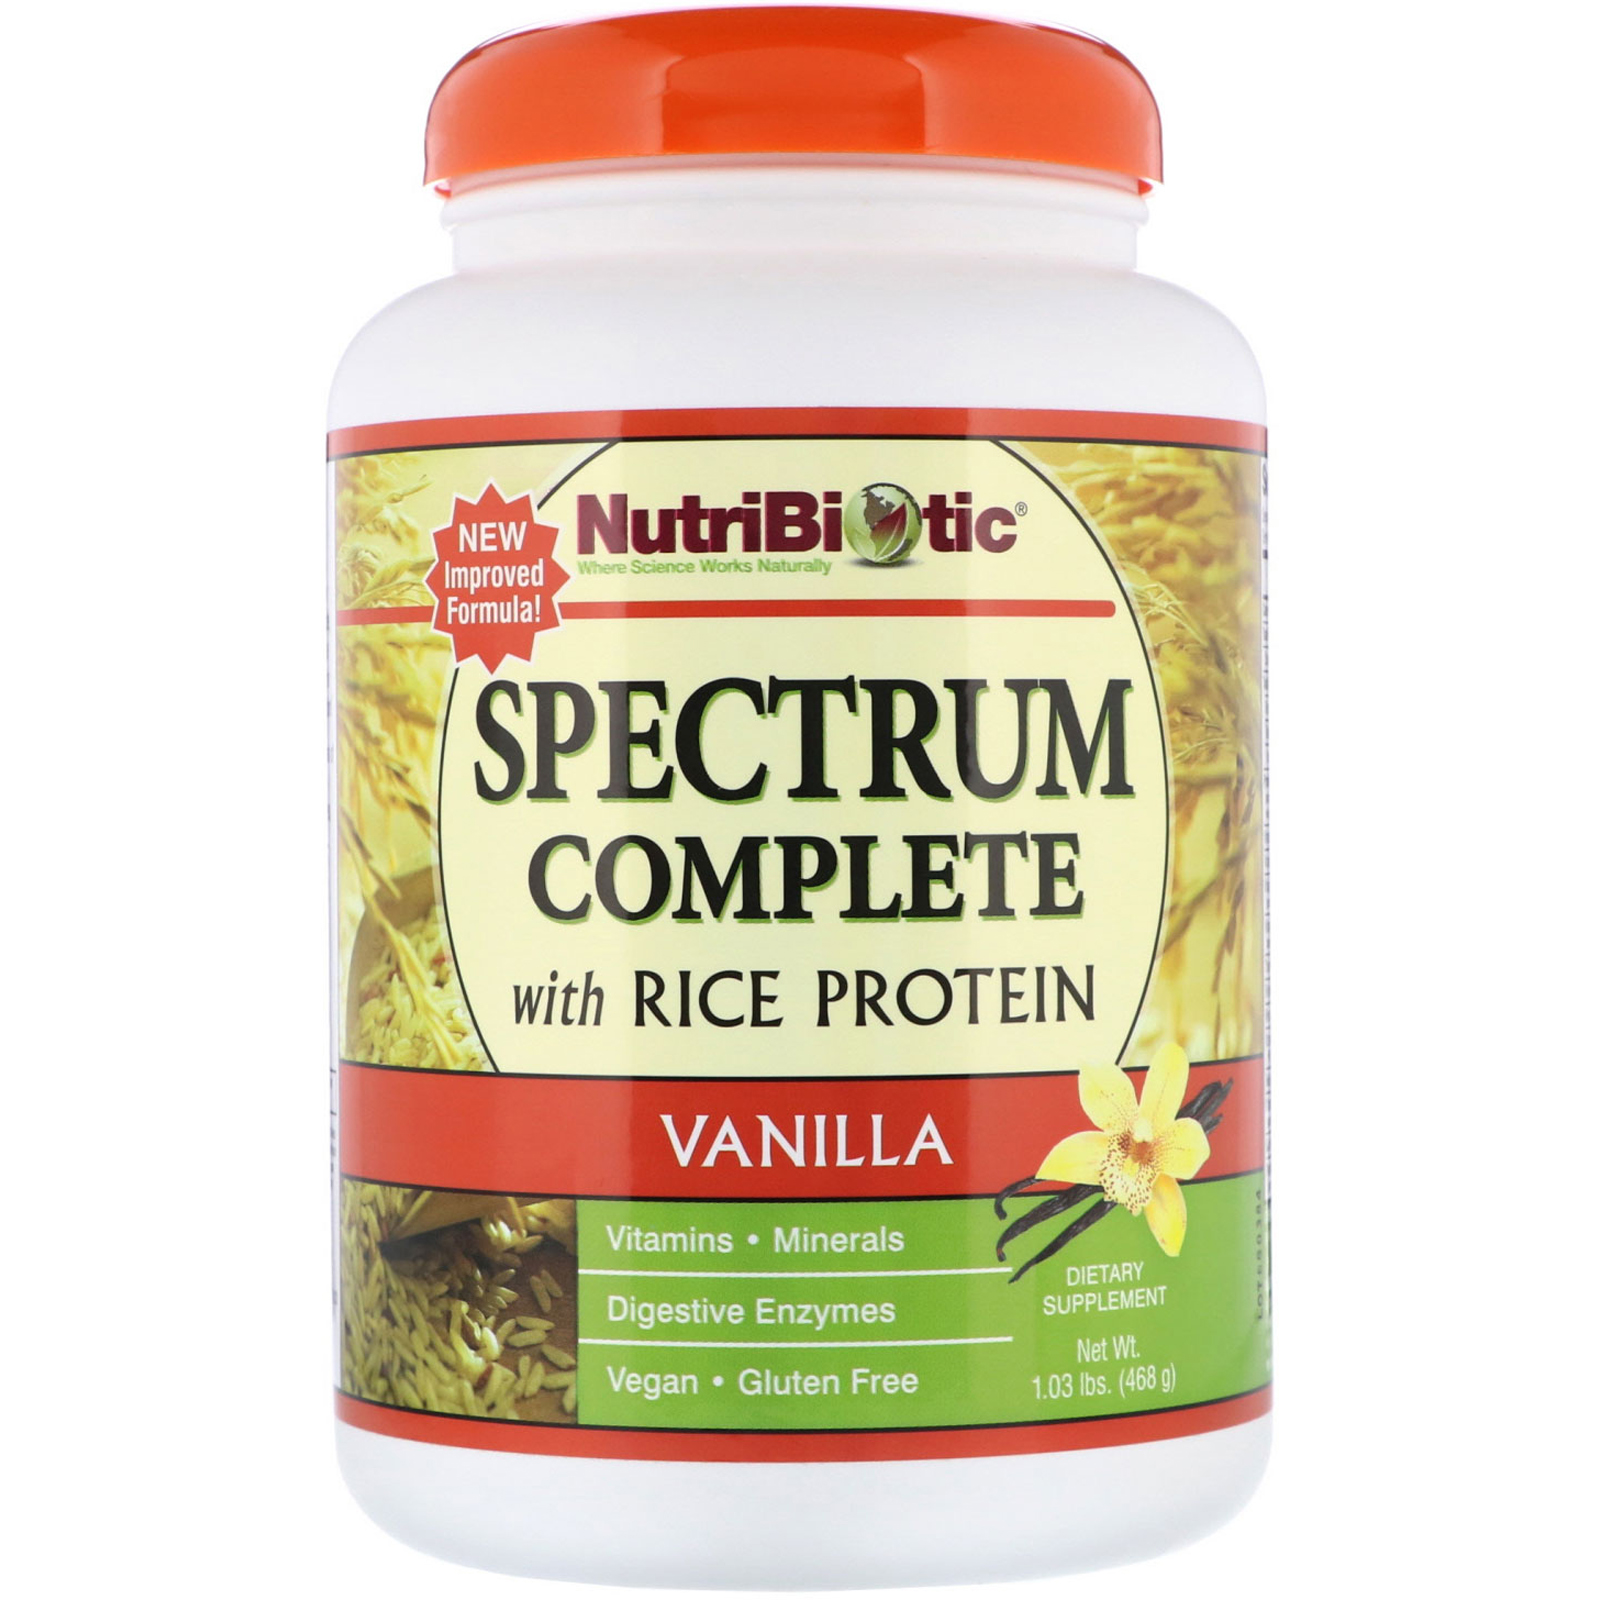 NutriBiotic, Spectrum Complete with Rice Protein, Vanilla, 1.03 lbs (468 g) (Discontinued Item)